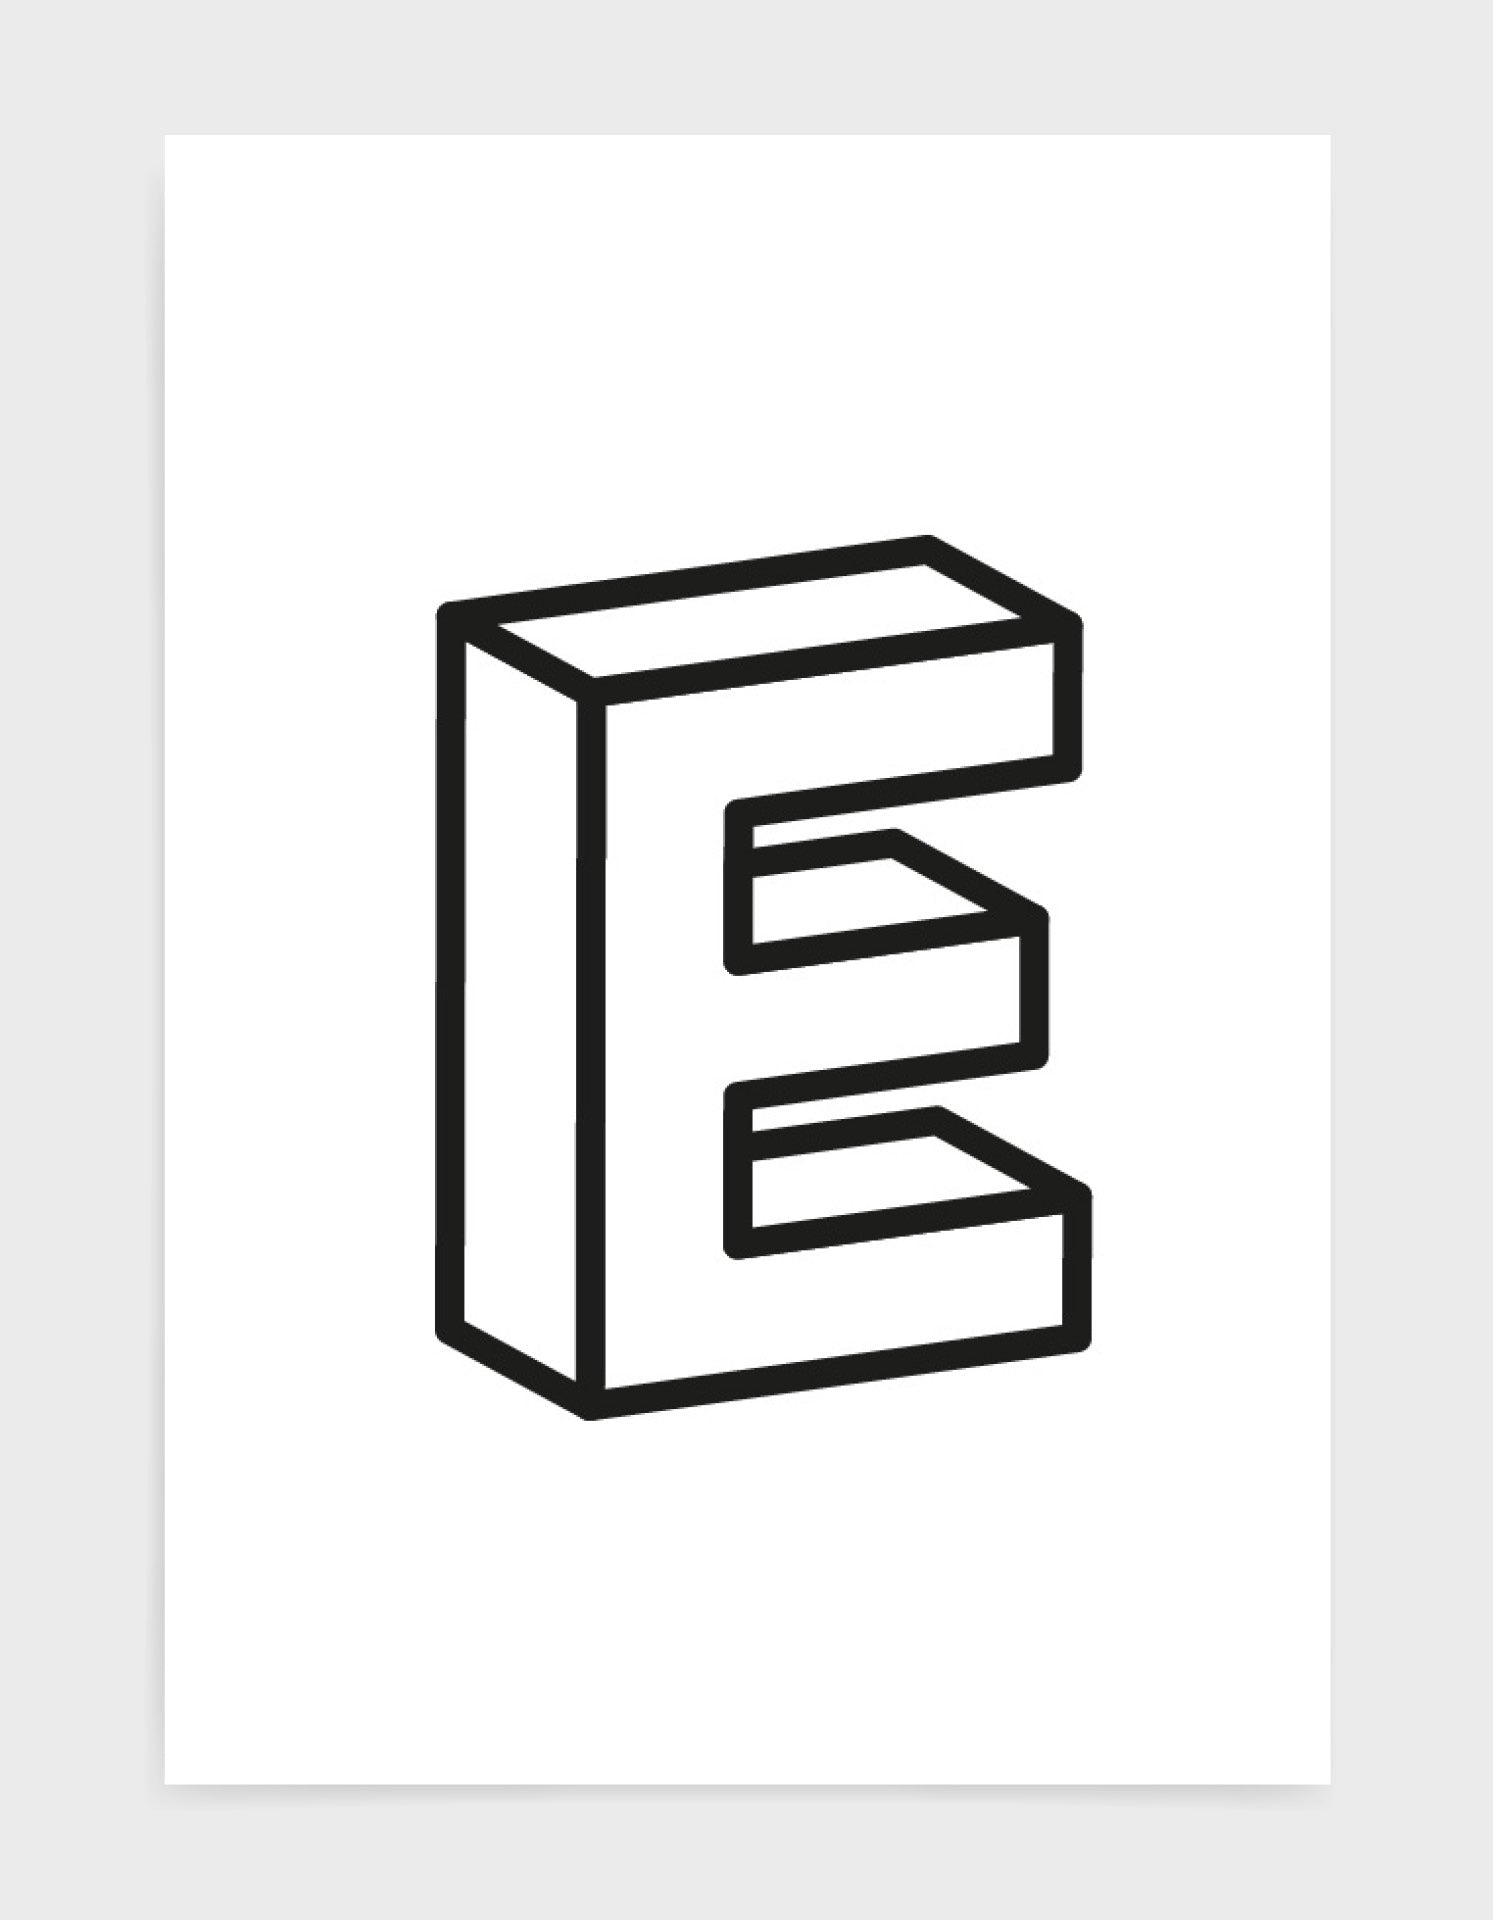 monochrome typography alphabet print depicting the letter E in 3D black type